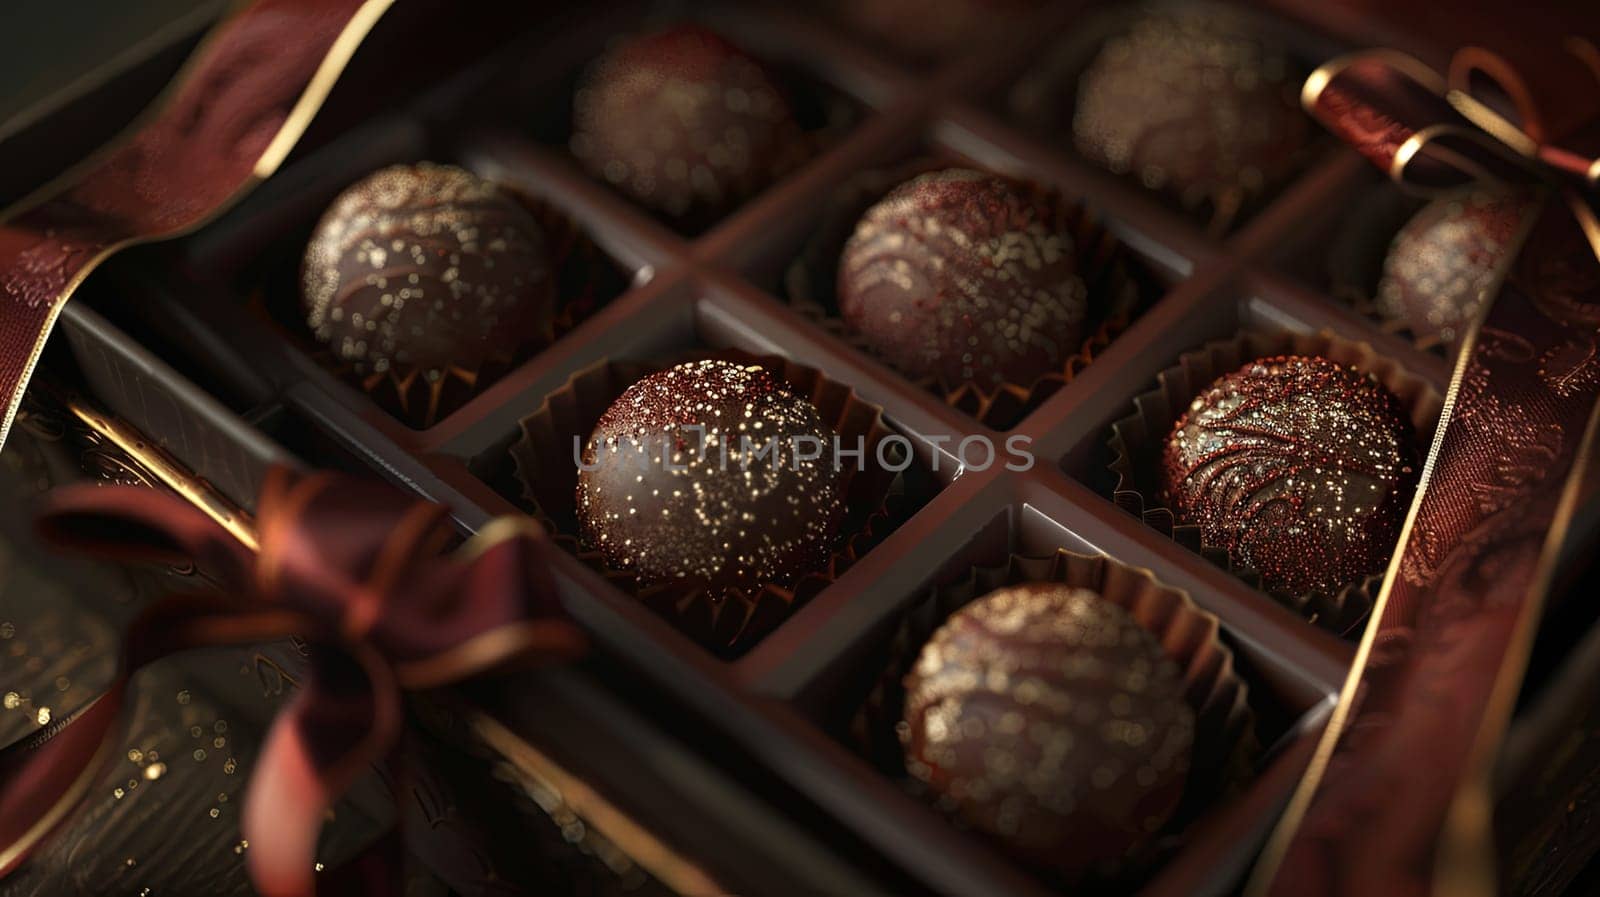 Luxurious box of chocolate truffles adorned with a ribbon, featuring rich dark colors and high detail.